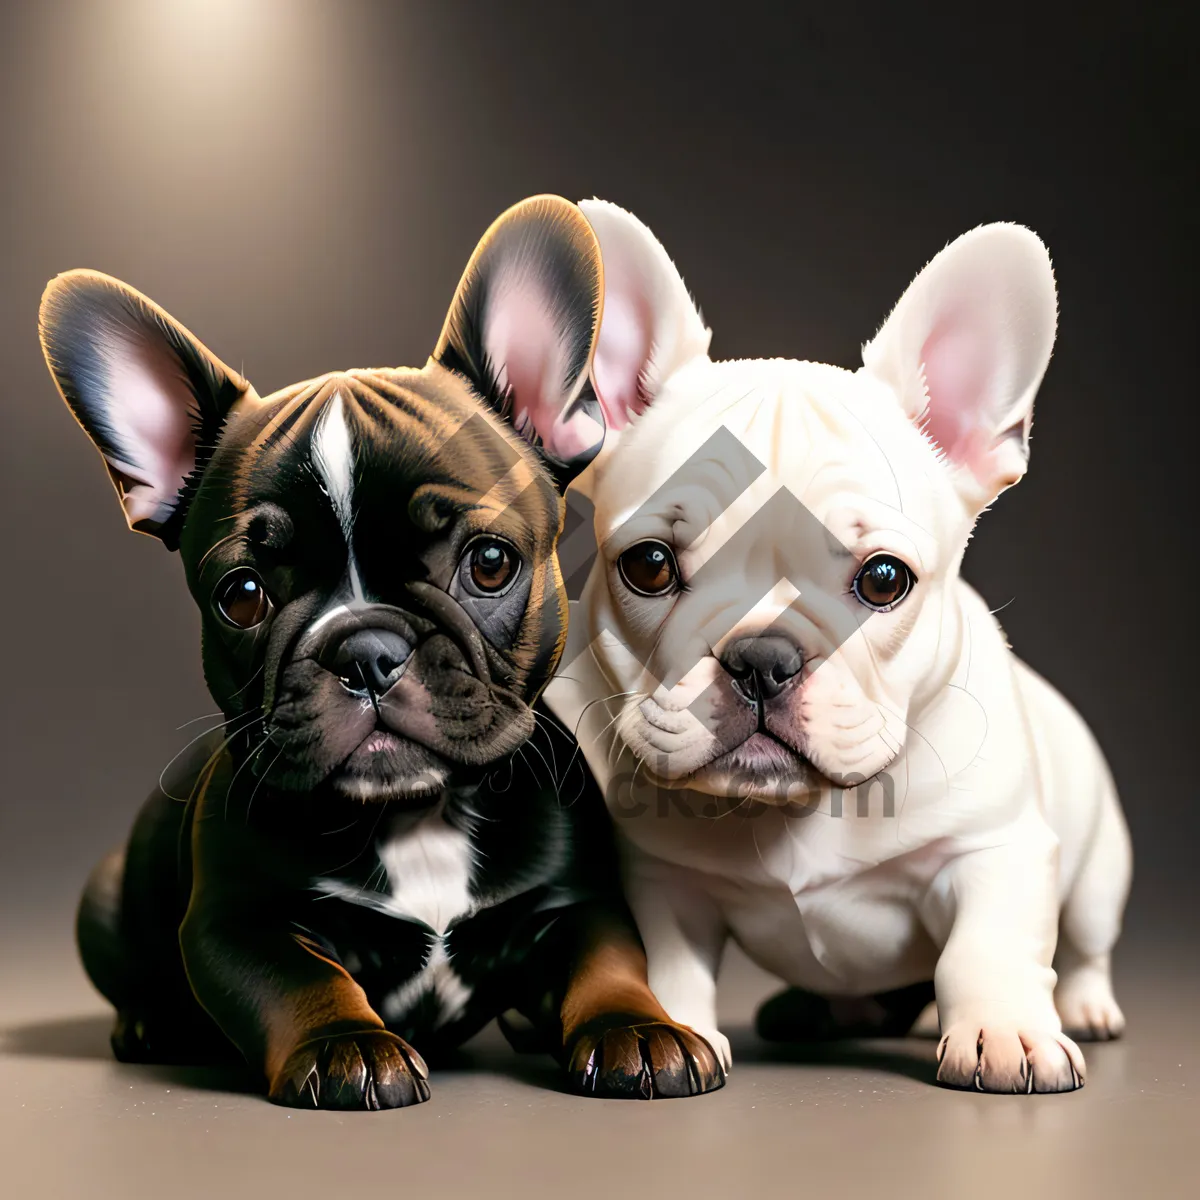 Picture of Enchanting Bulldog Puppy Captured in a Studio Portrait